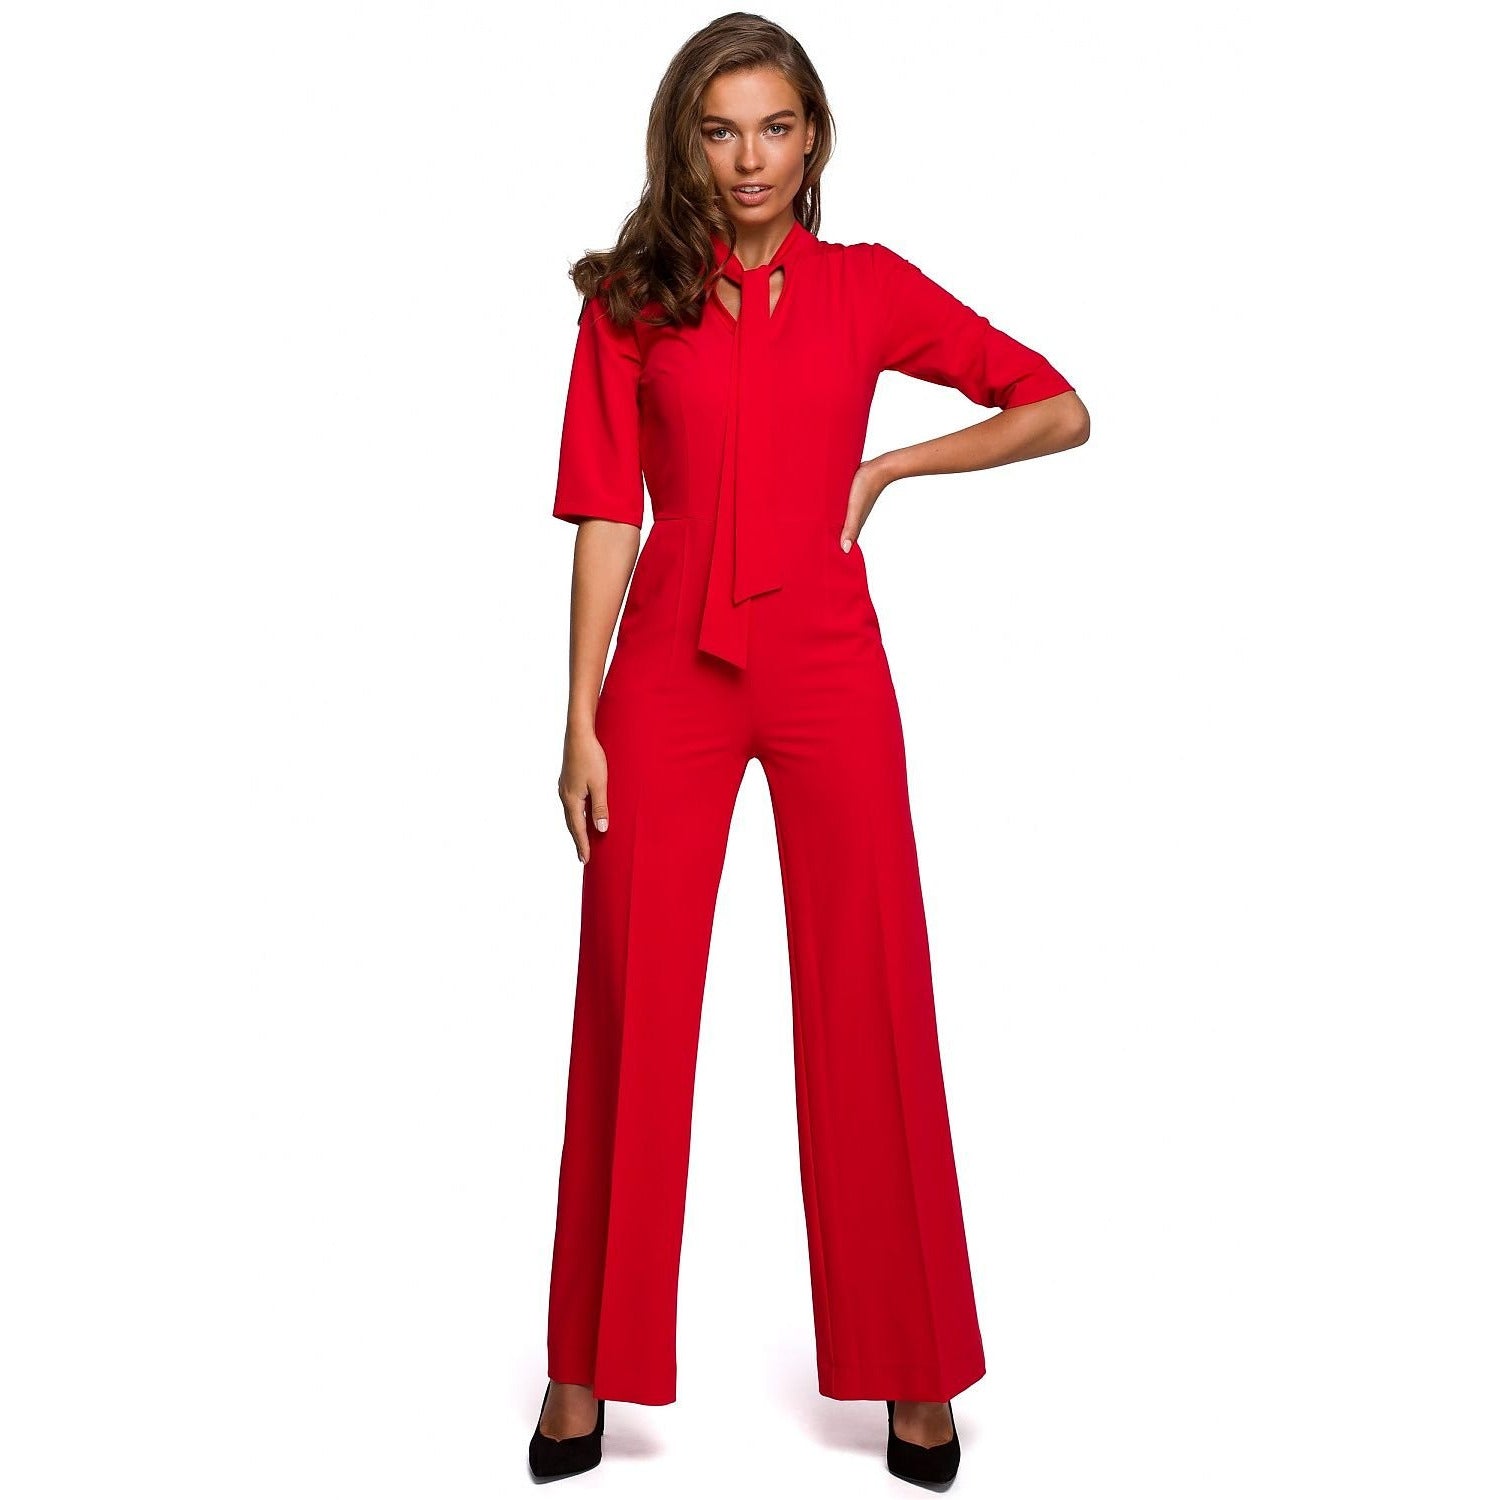 Women Red Jumpsuit - KME means the very best